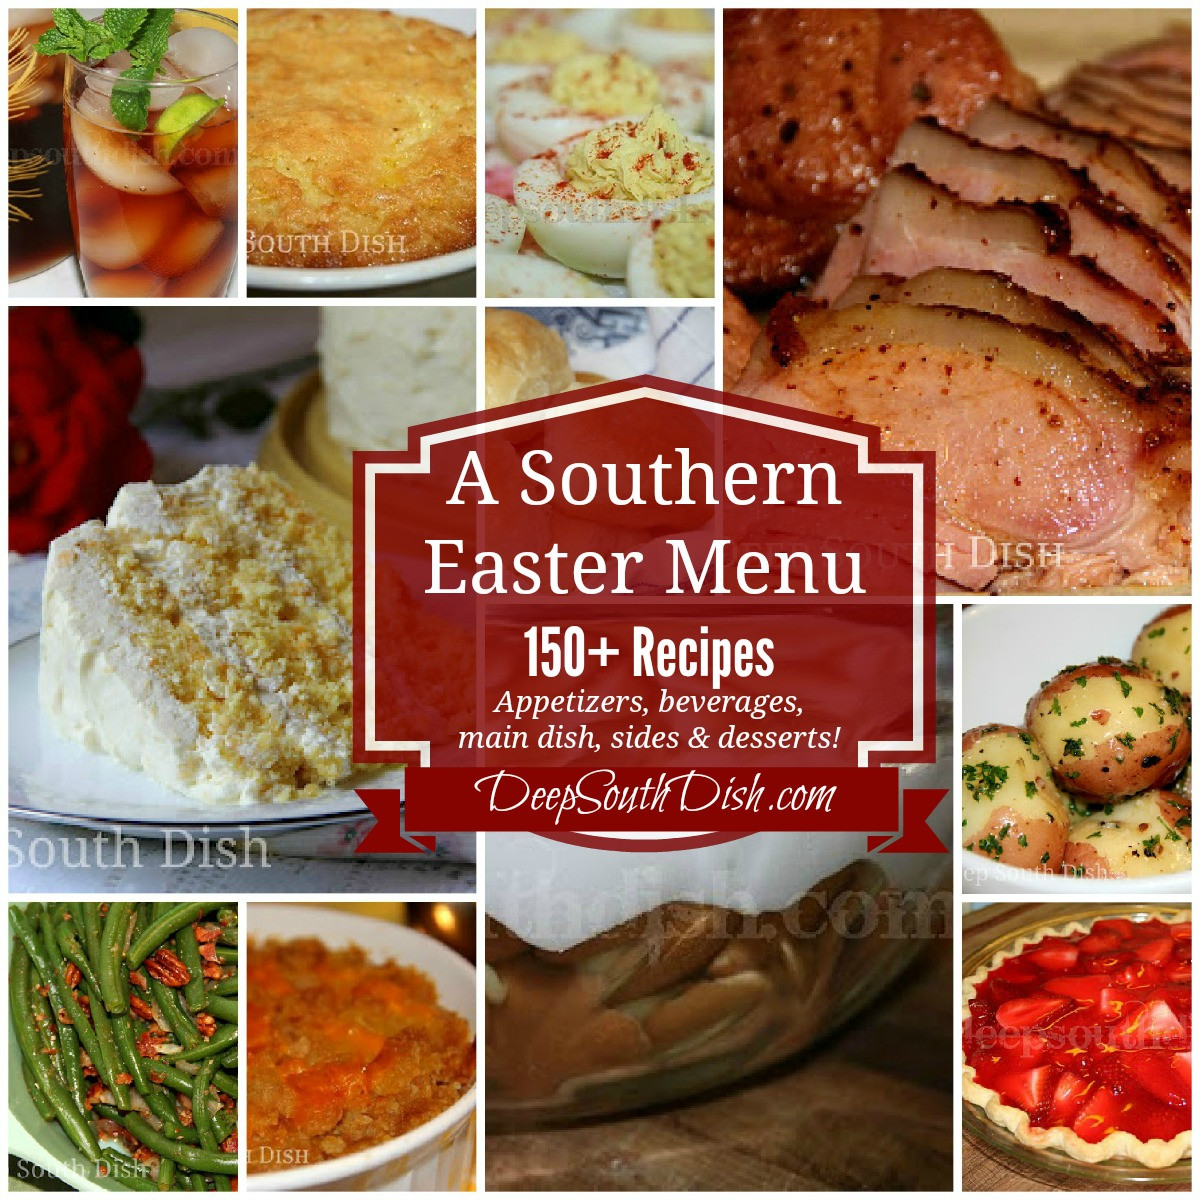 Easter Dinner Menu Ideas
 Deep South Dish Southern Easter Menu Ideas and Recipes